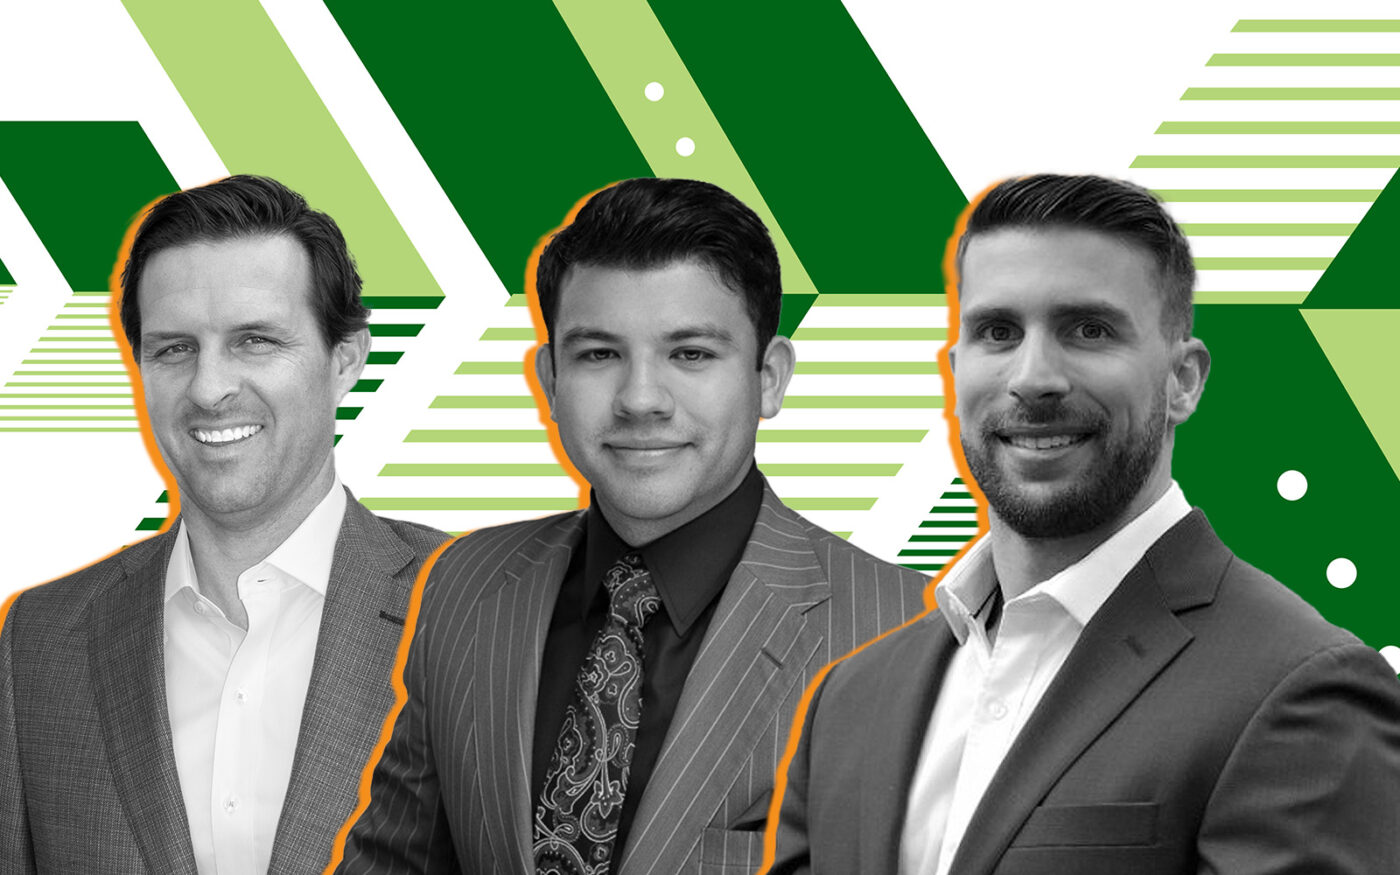 Stream Realty Partners' Shawn M. Street, Compass' Alec Almuina and Land Strategies Inc's Michael Linehan